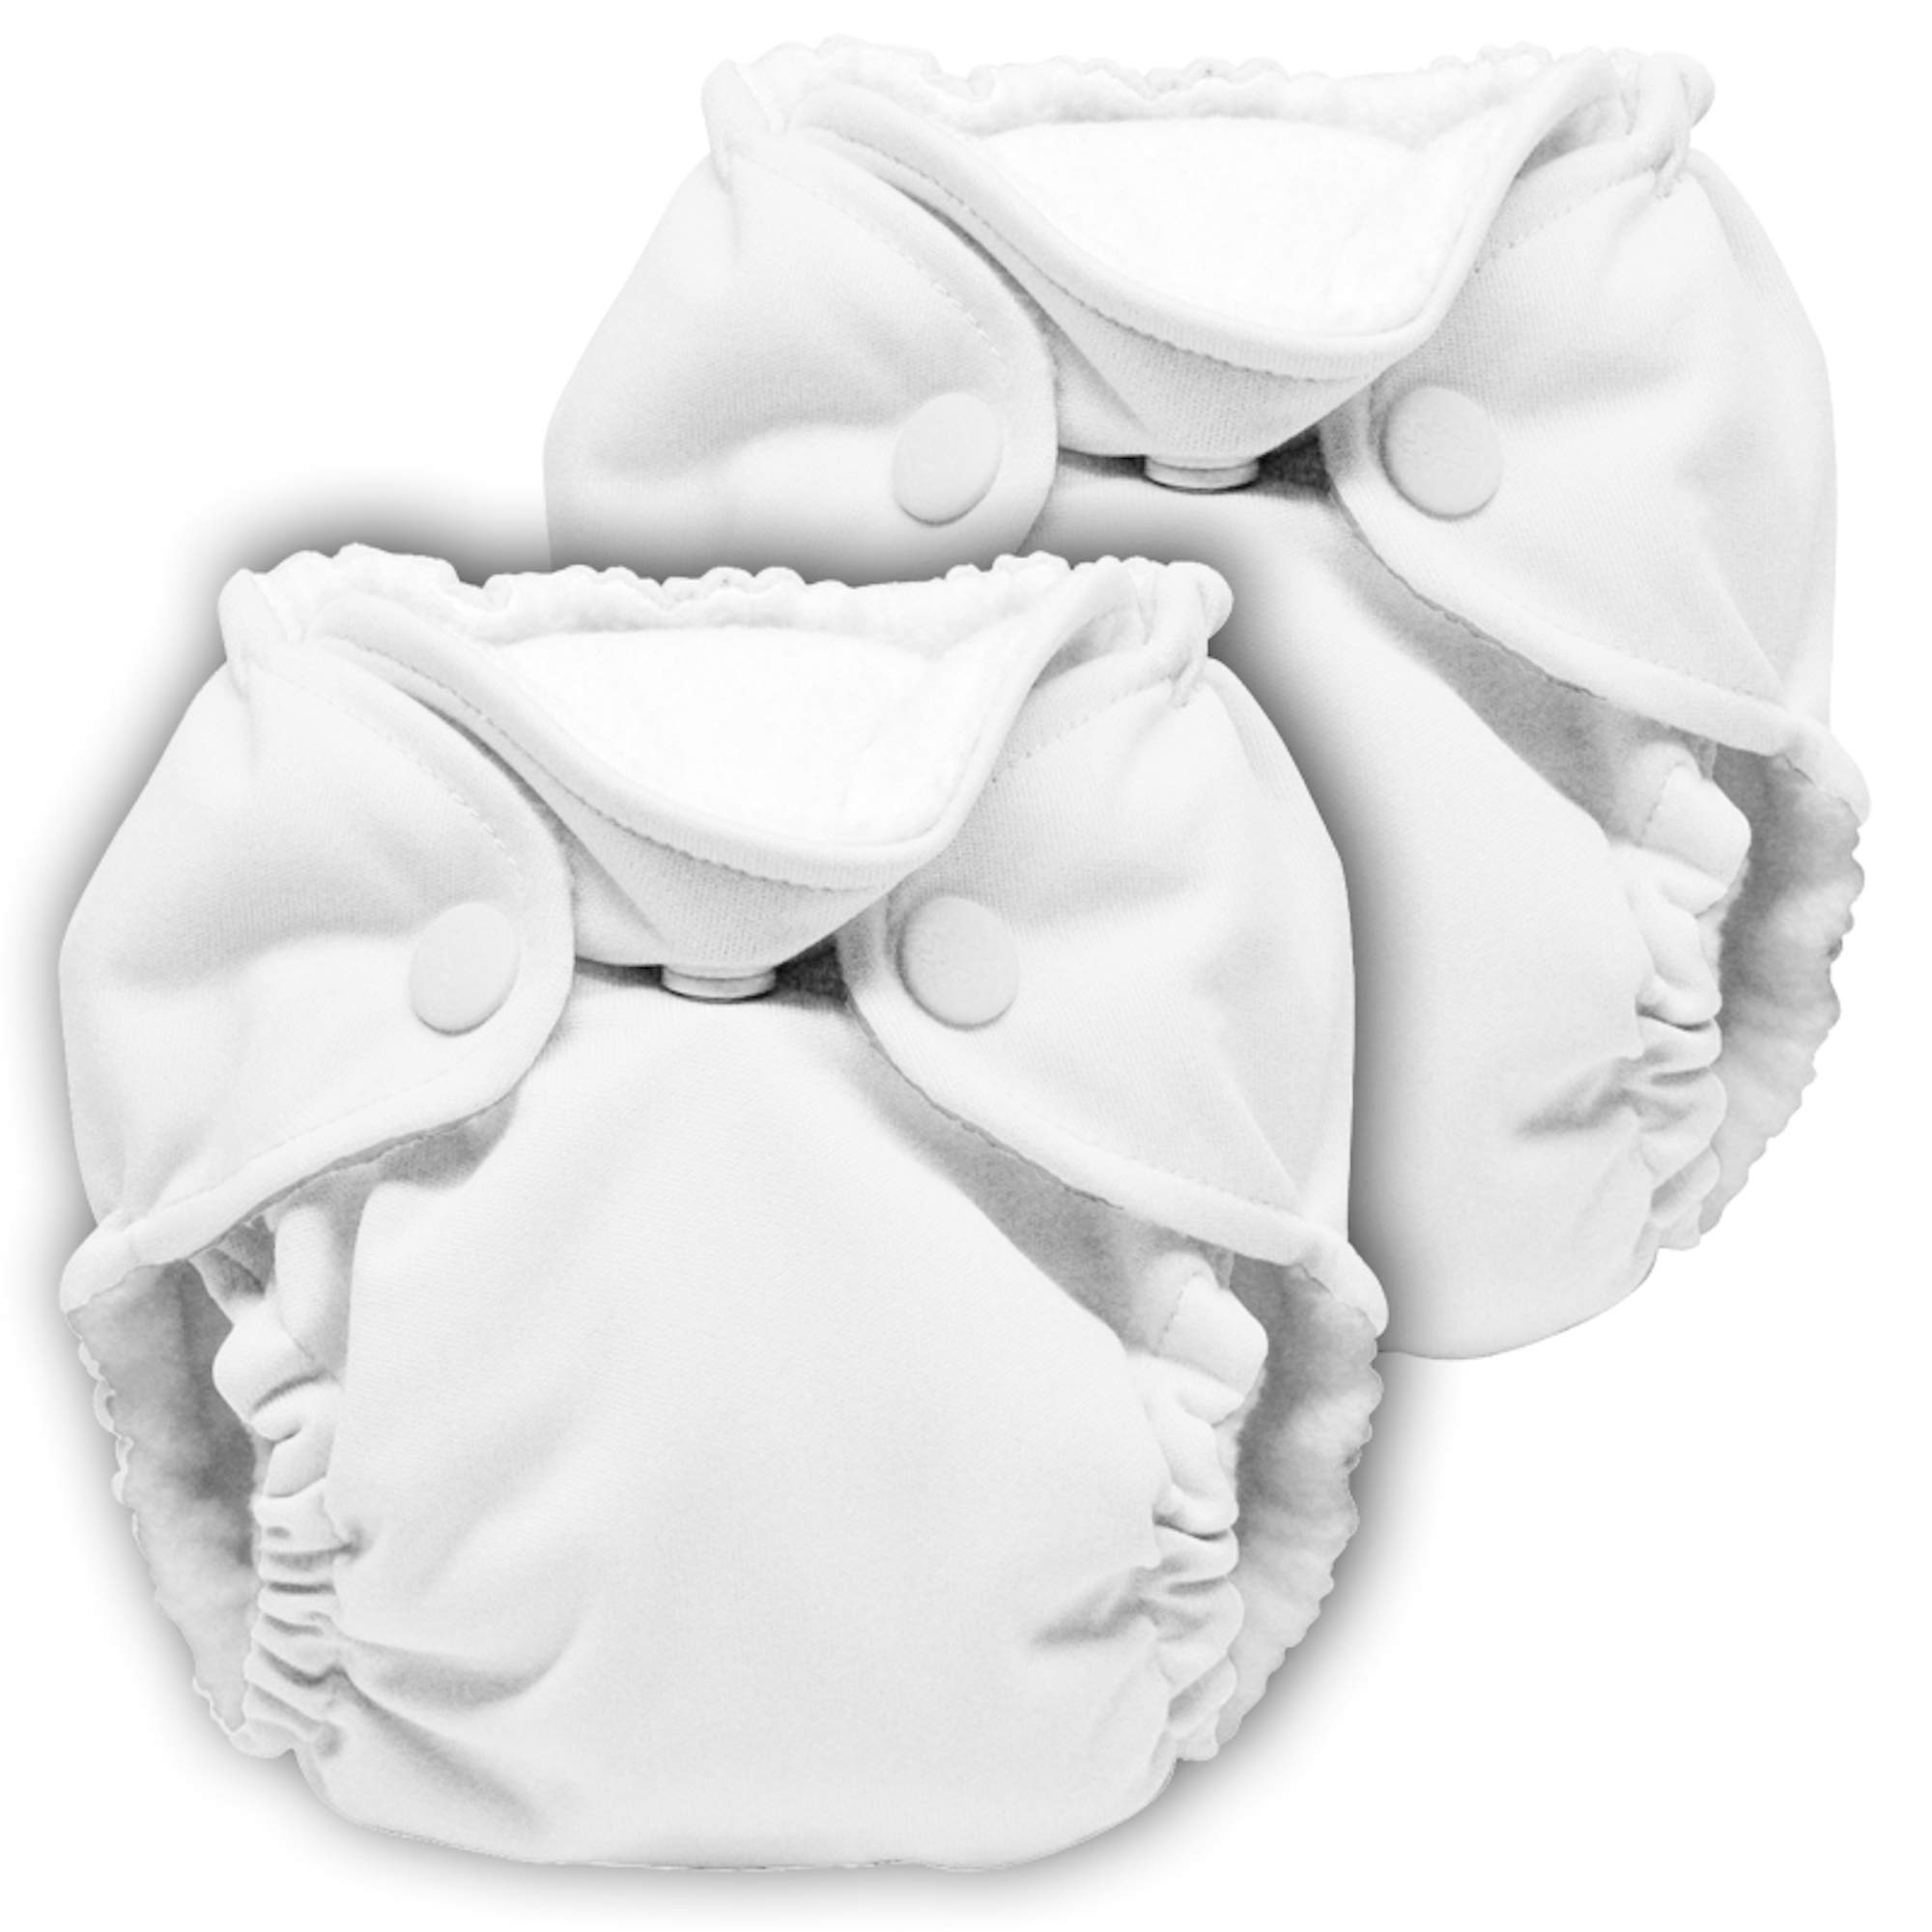 Kanga Care Lil Joey 2 Pack All-in-One Cloth Diaper, Fluff